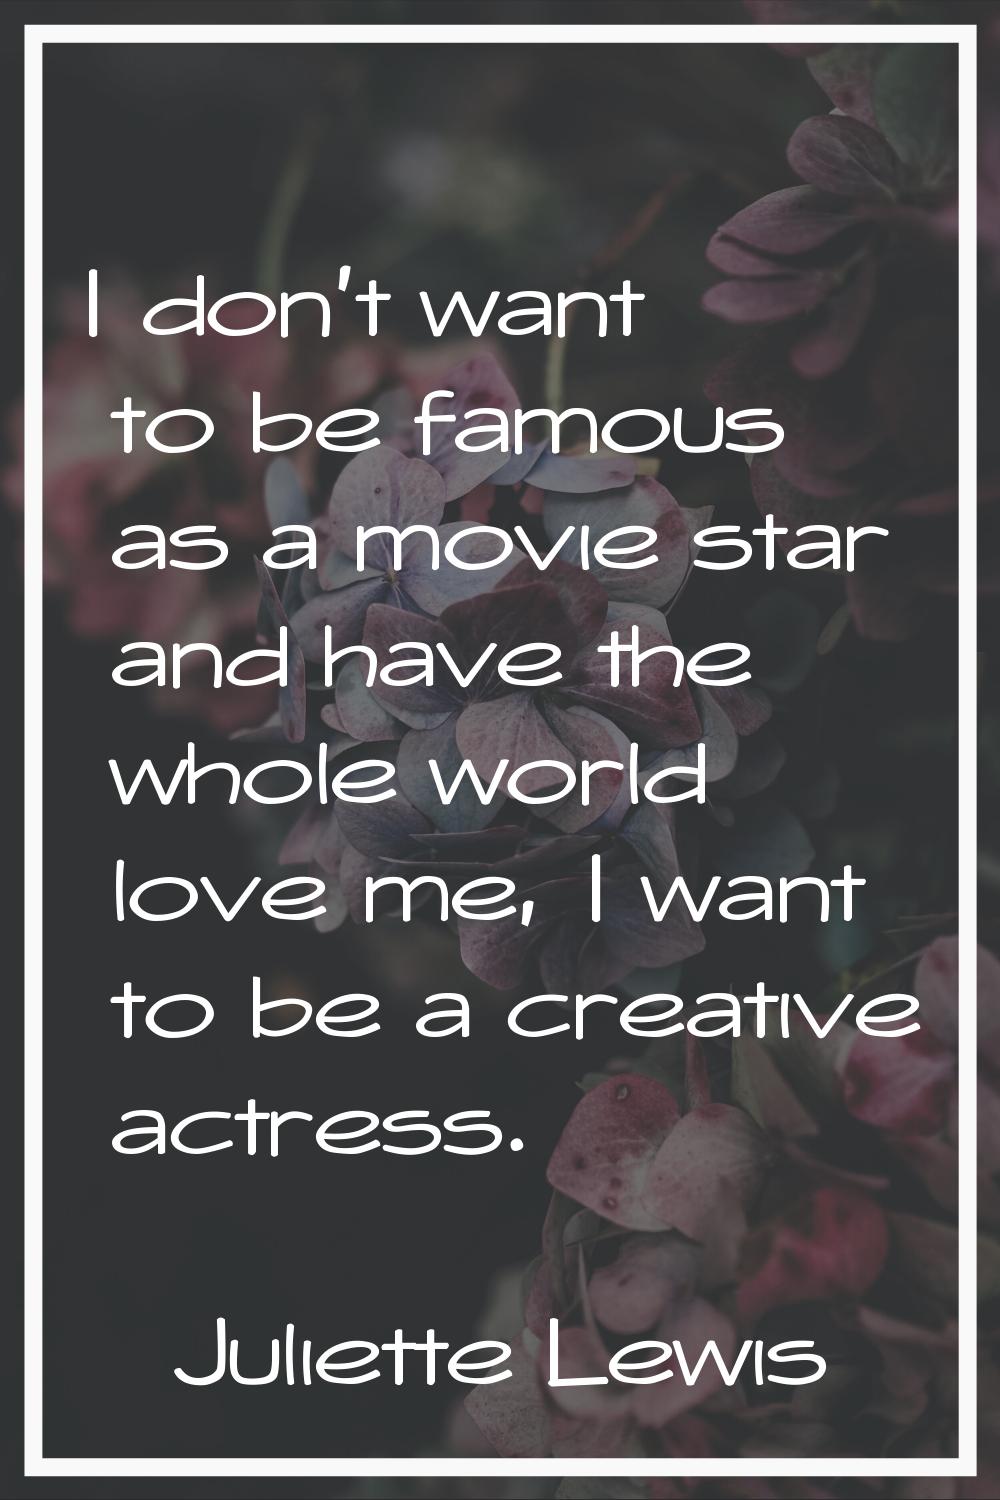 I don't want to be famous as a movie star and have the whole world love me, I want to be a creative